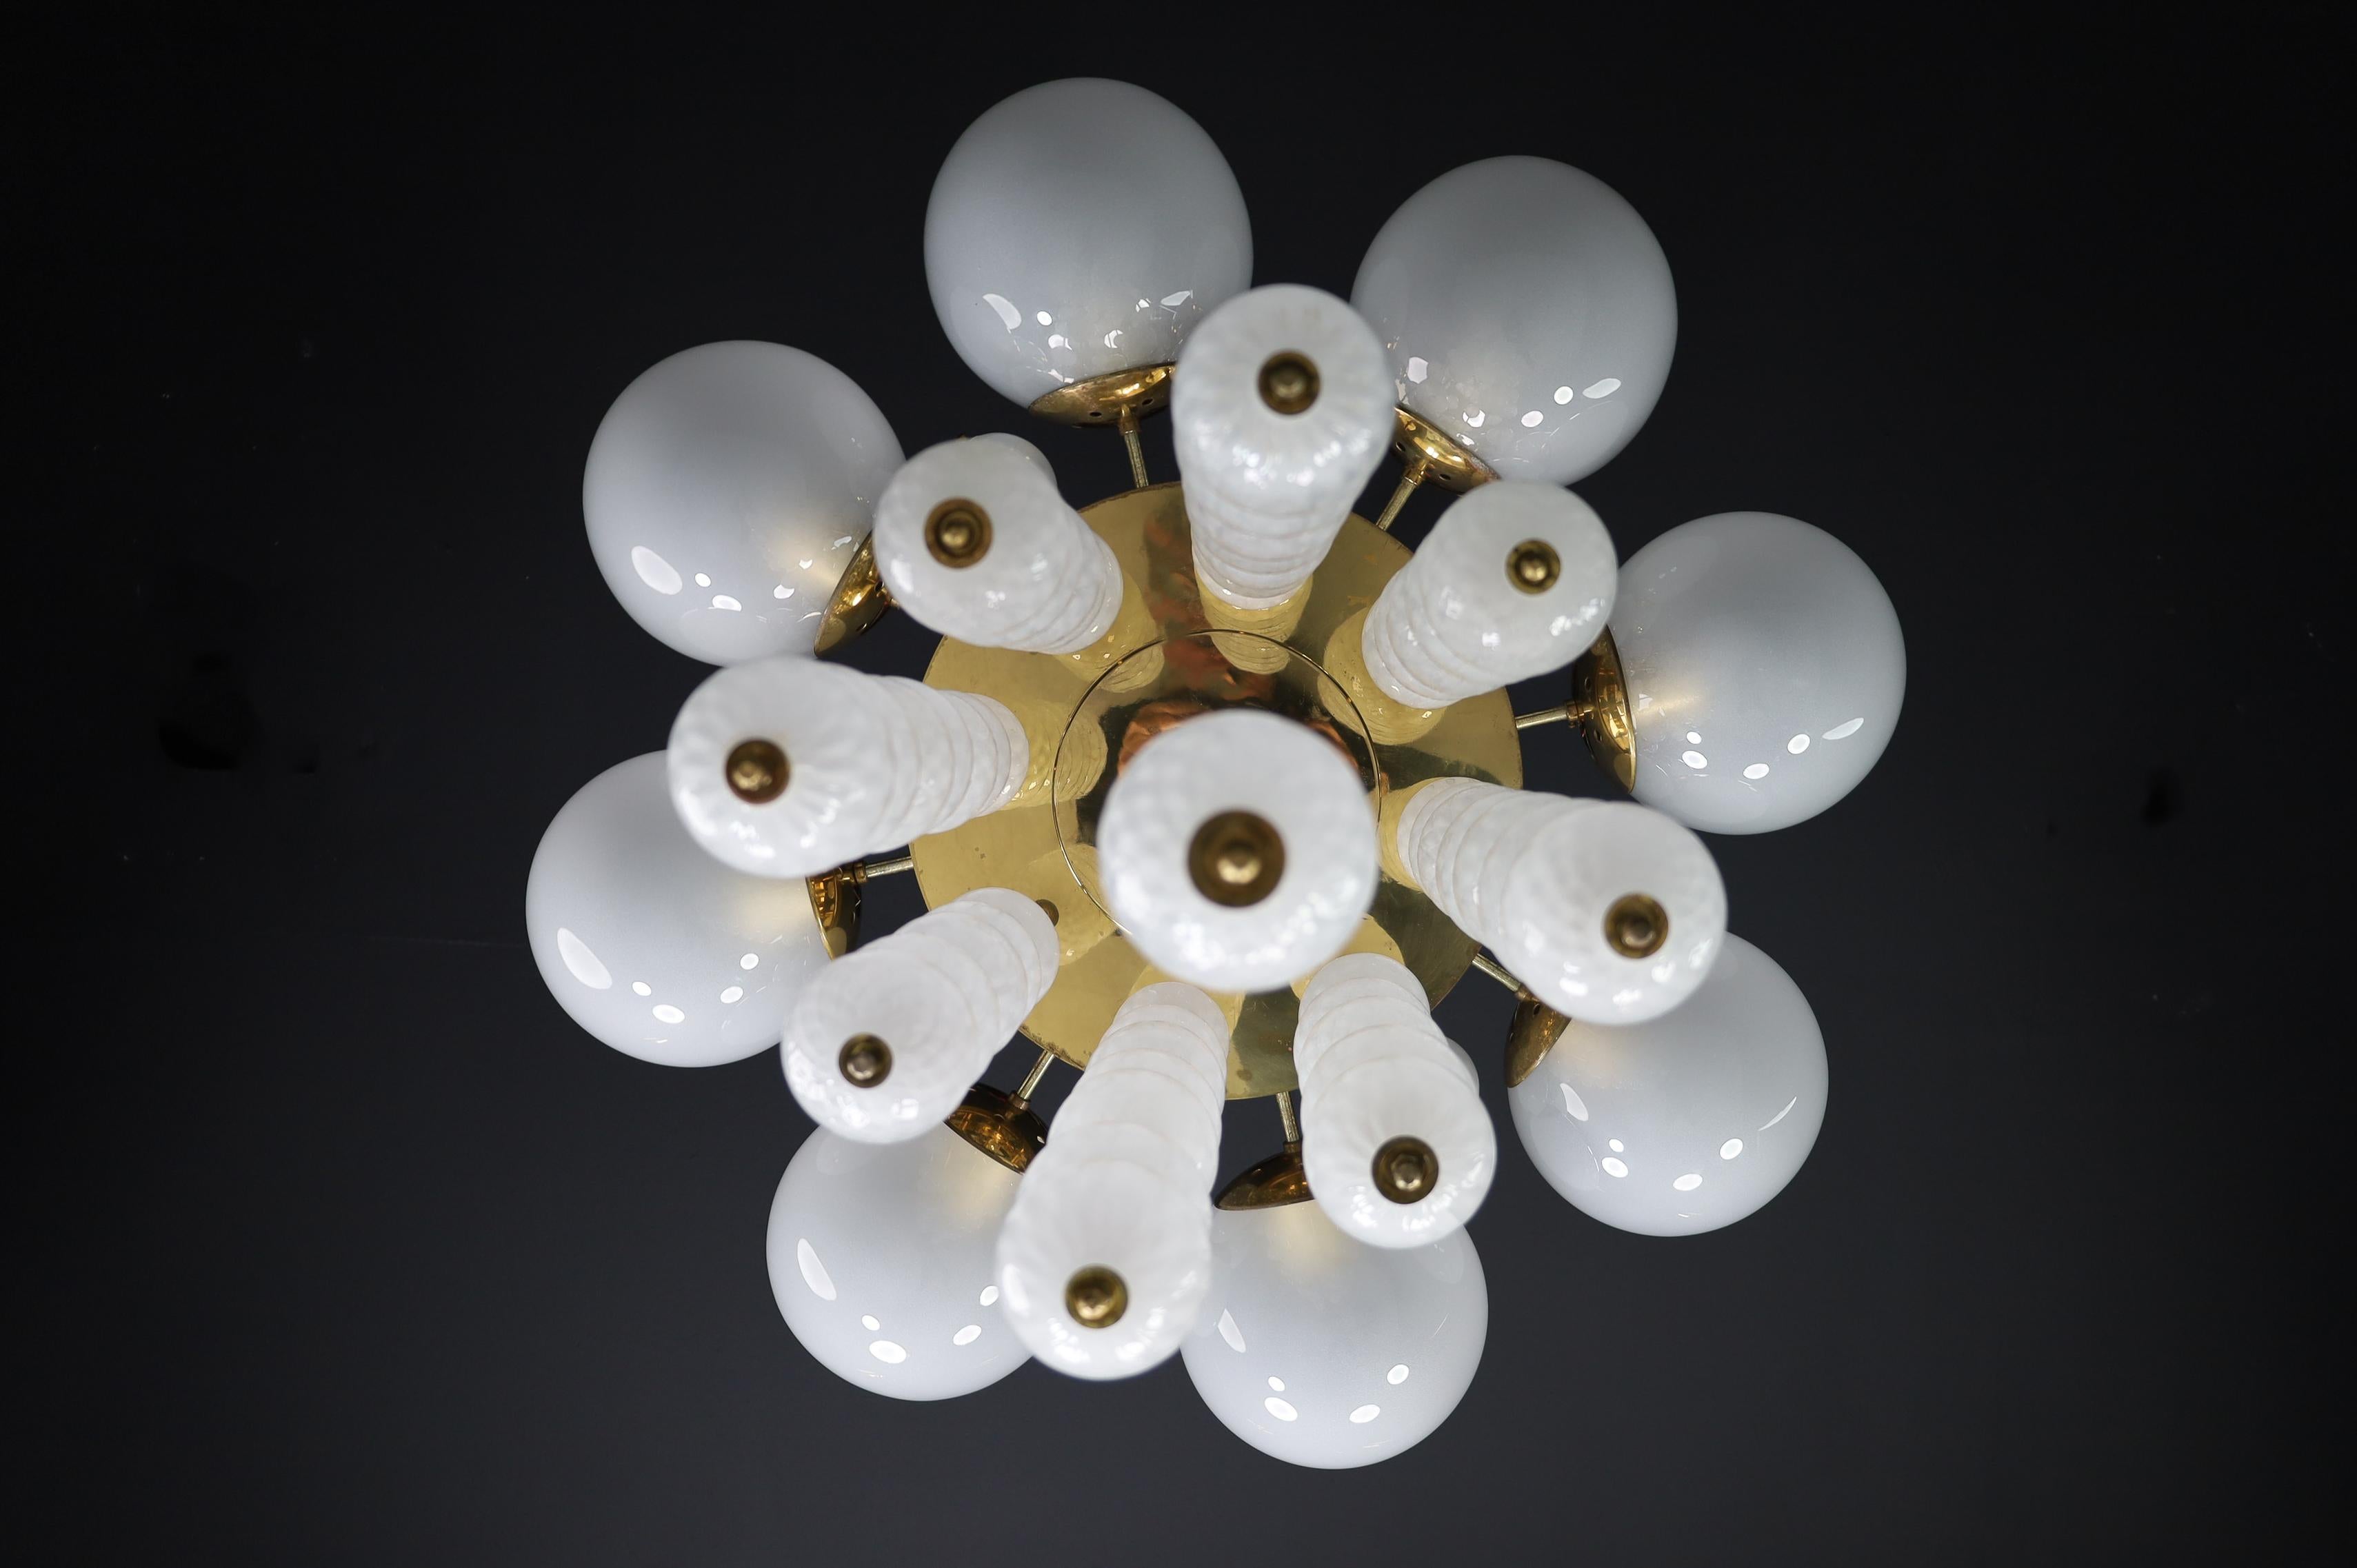 Grand Chandelier with Brass Fixture and Hand-blowed Frosted Glass Globes, 1960s For Sale 7